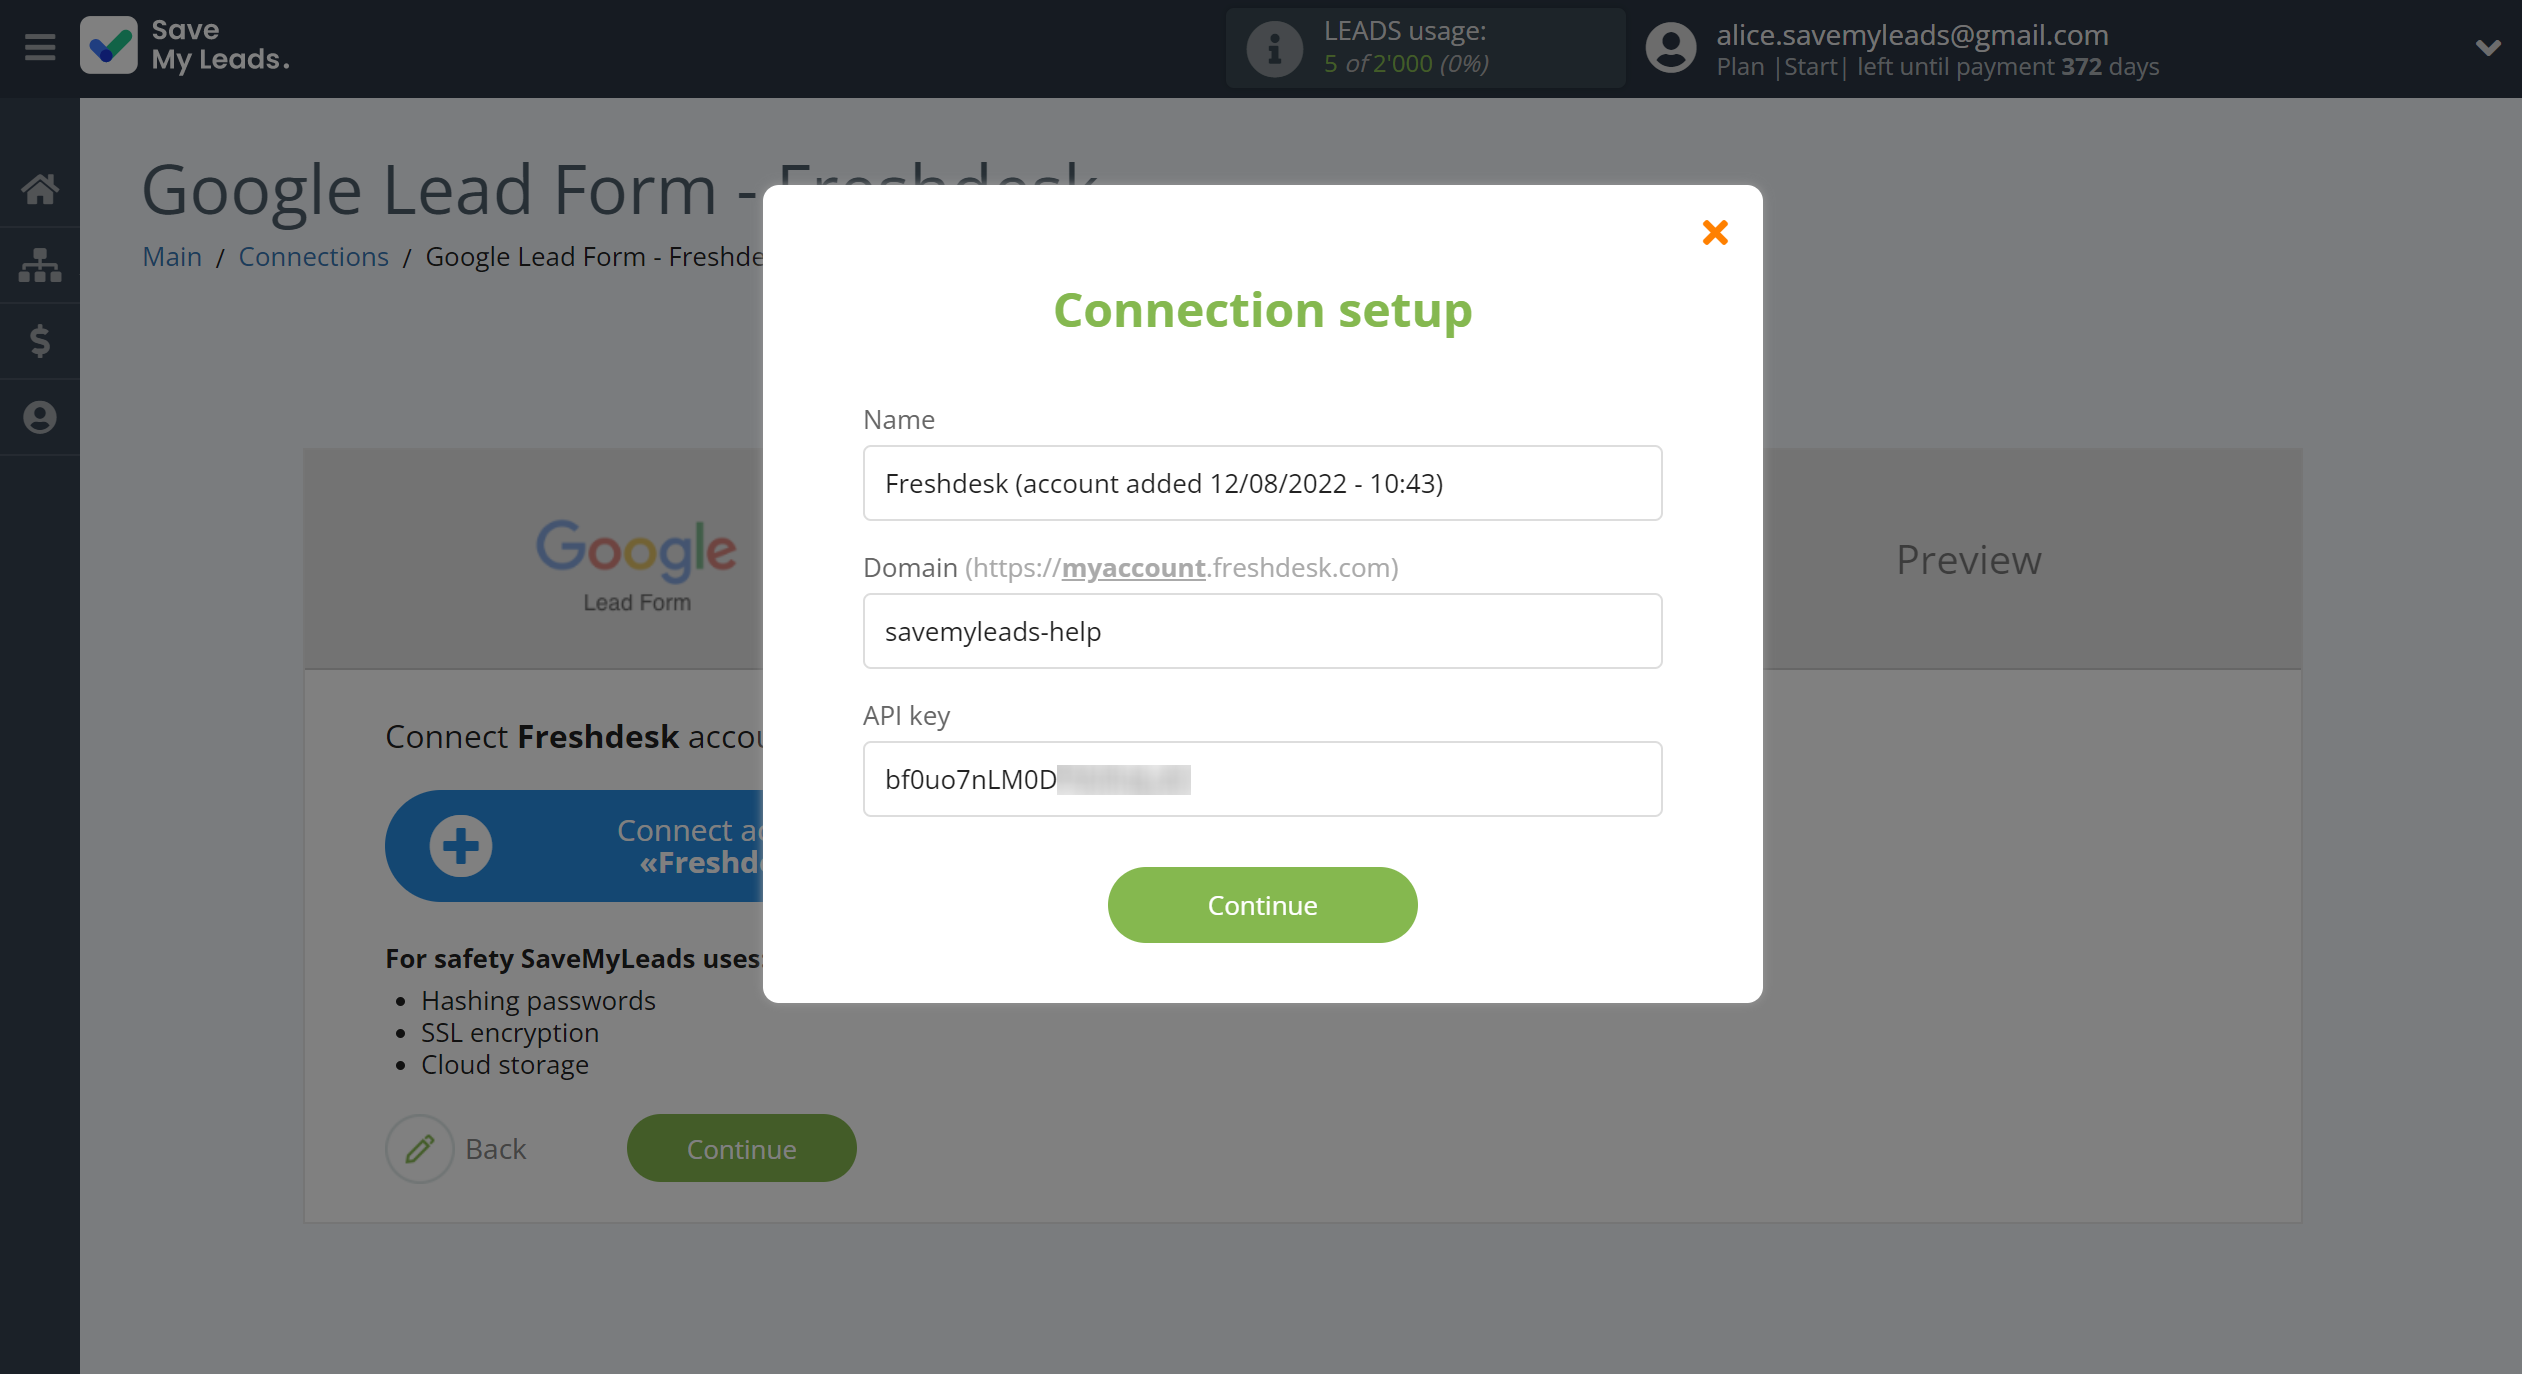 How to Connect Google Lead Form with Freshdesk Create Ticket | Data Destination account connection